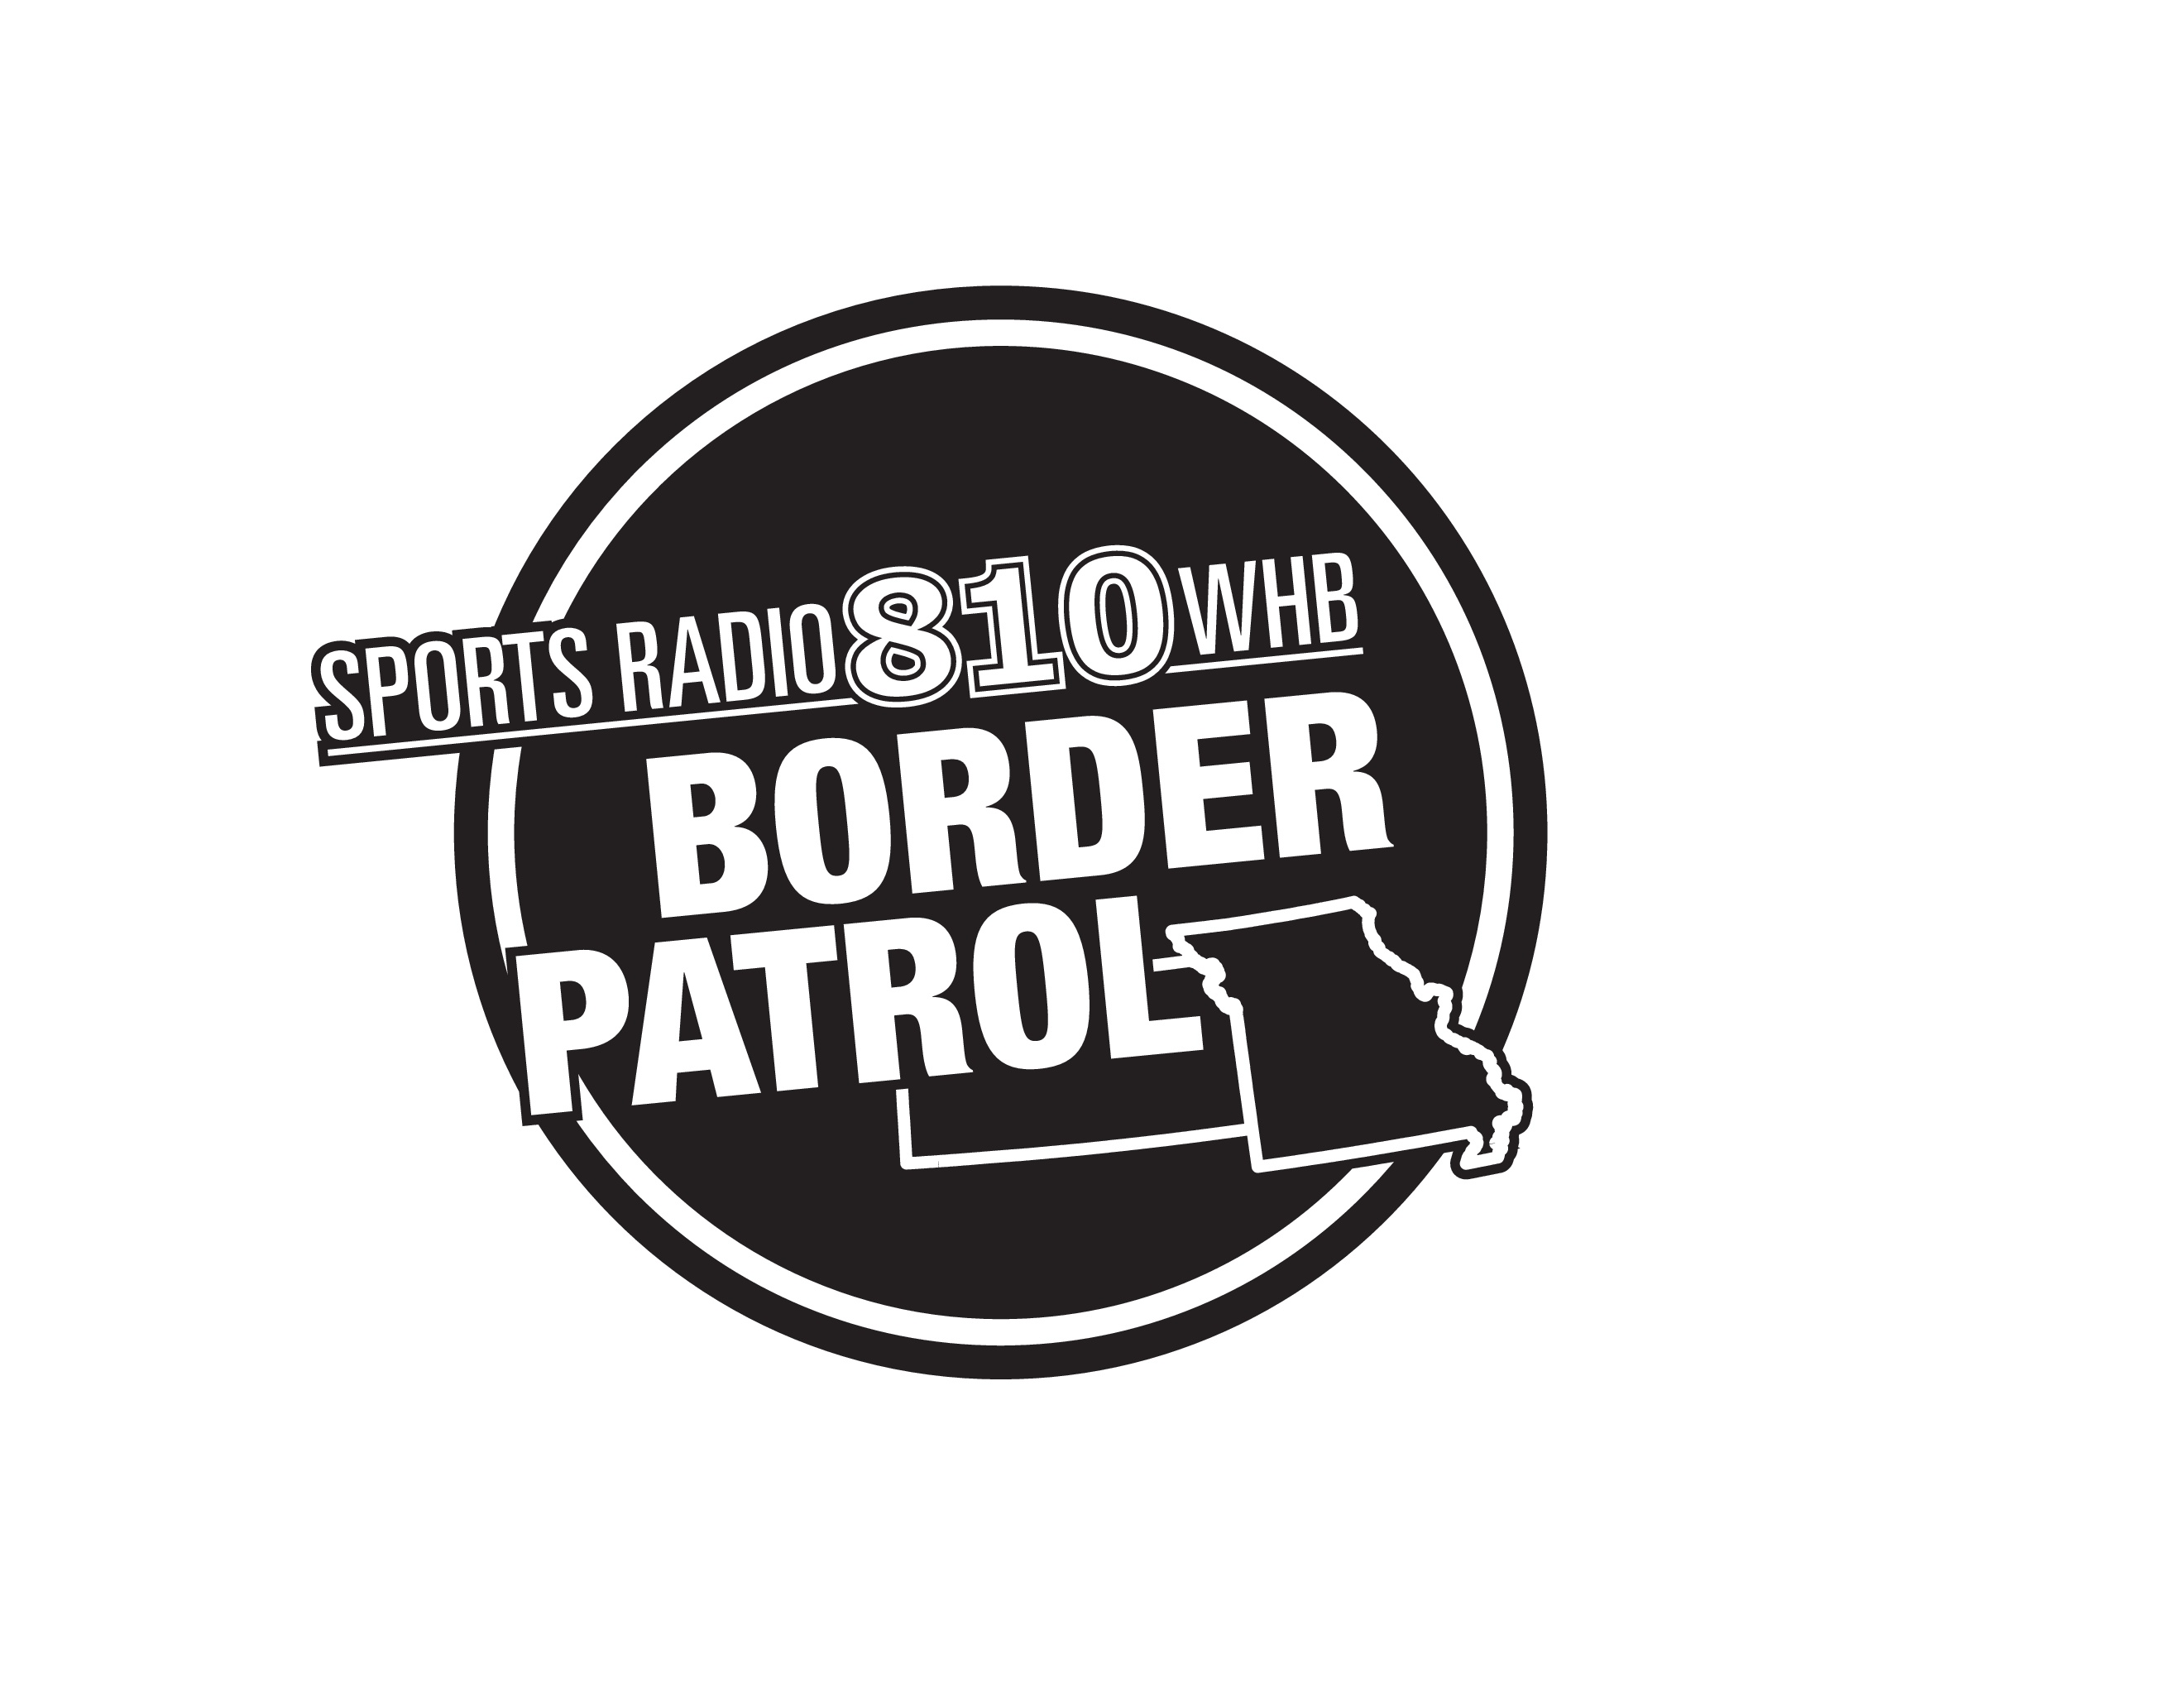 8-15-22 HR 1 of The Border Patrol on 38 The Spot